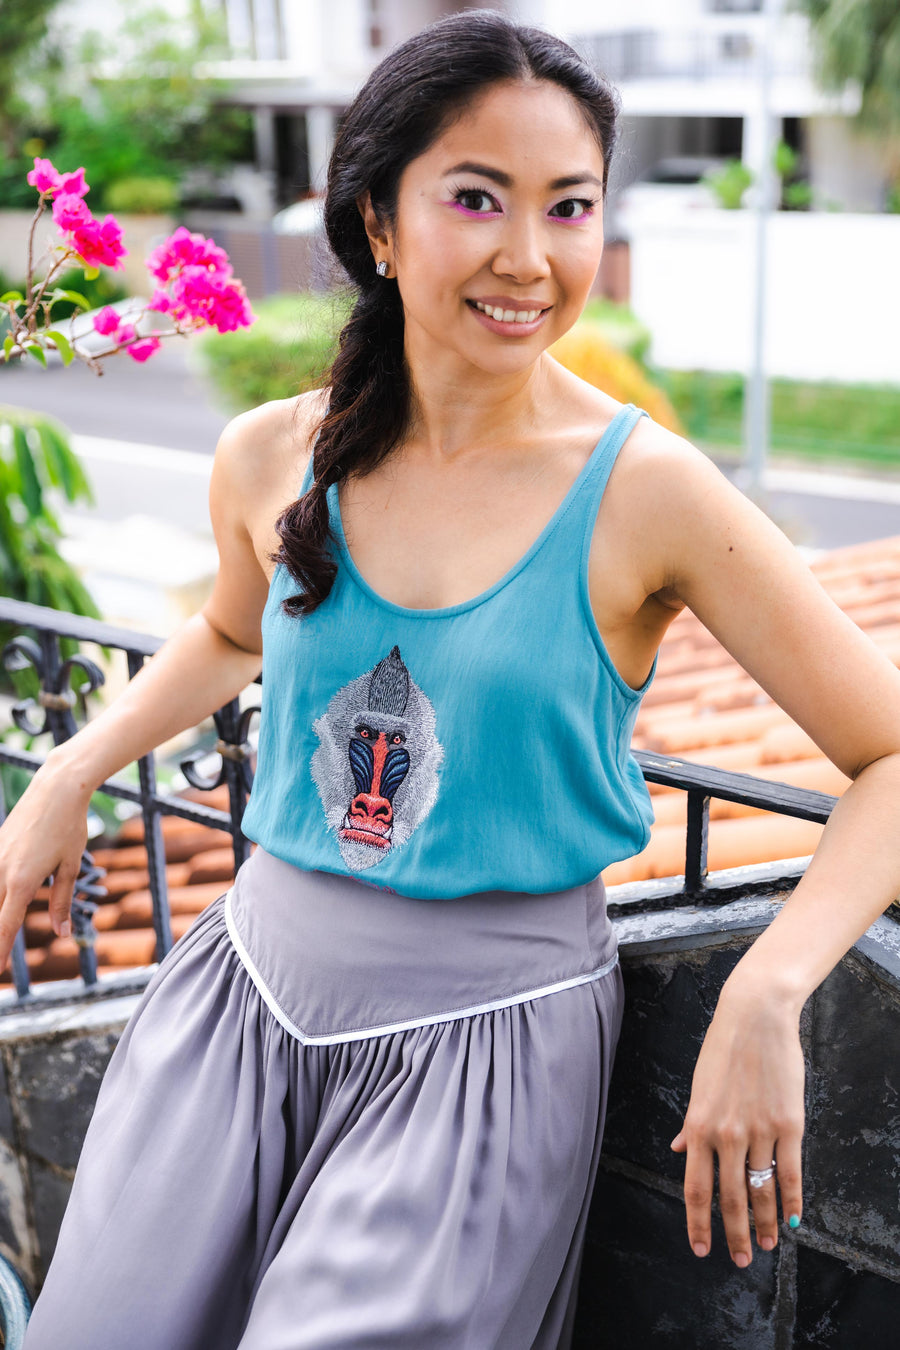 The Look mandrill top